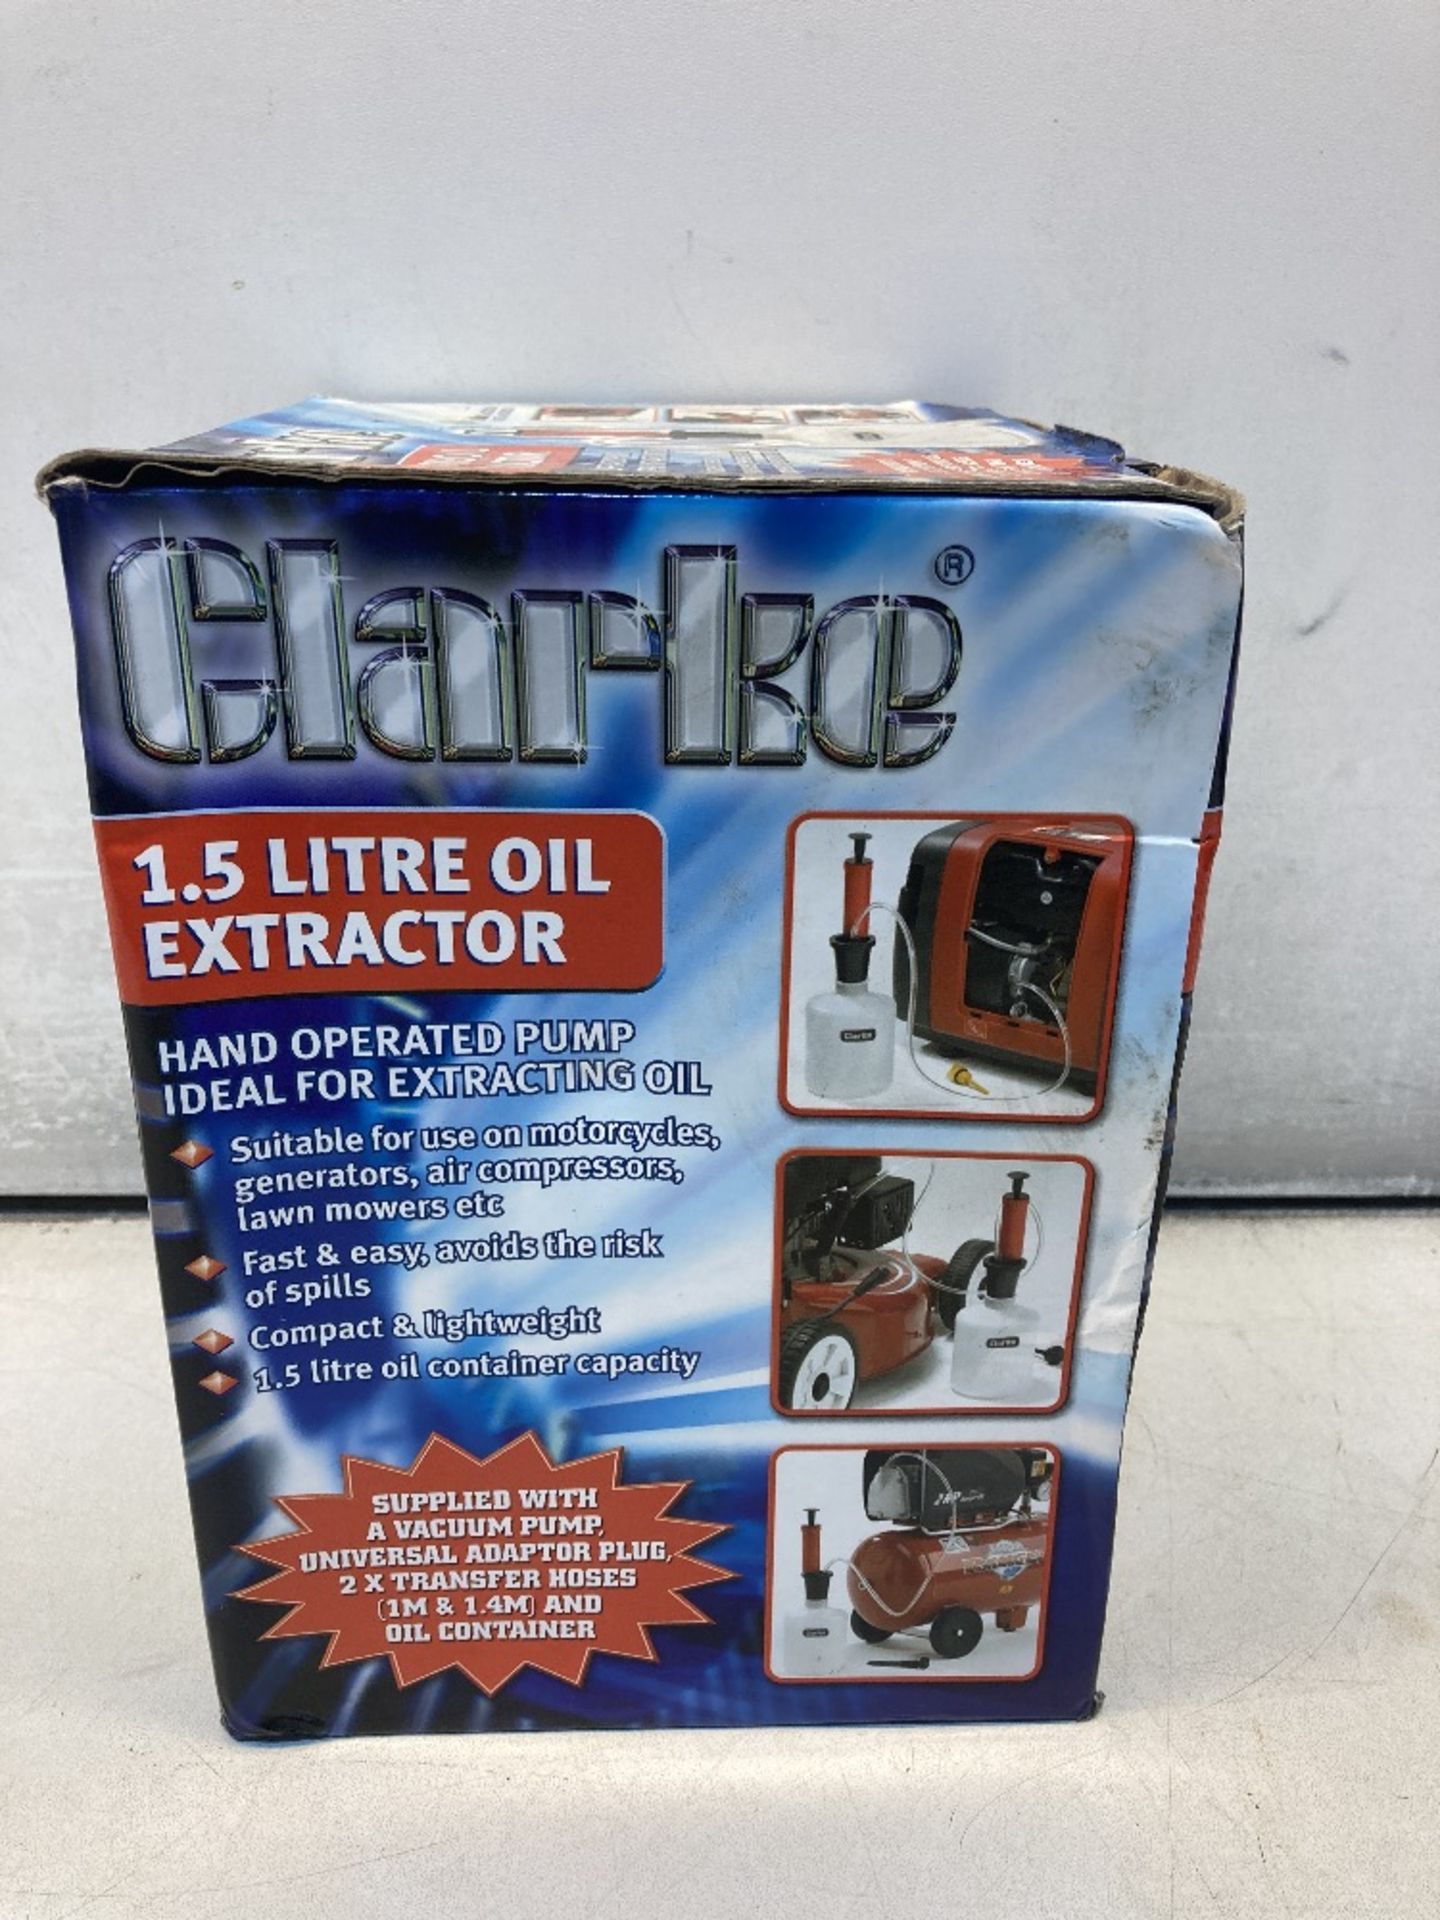 Clarke 1.5 Ltr Oil Extractor - Image 2 of 2